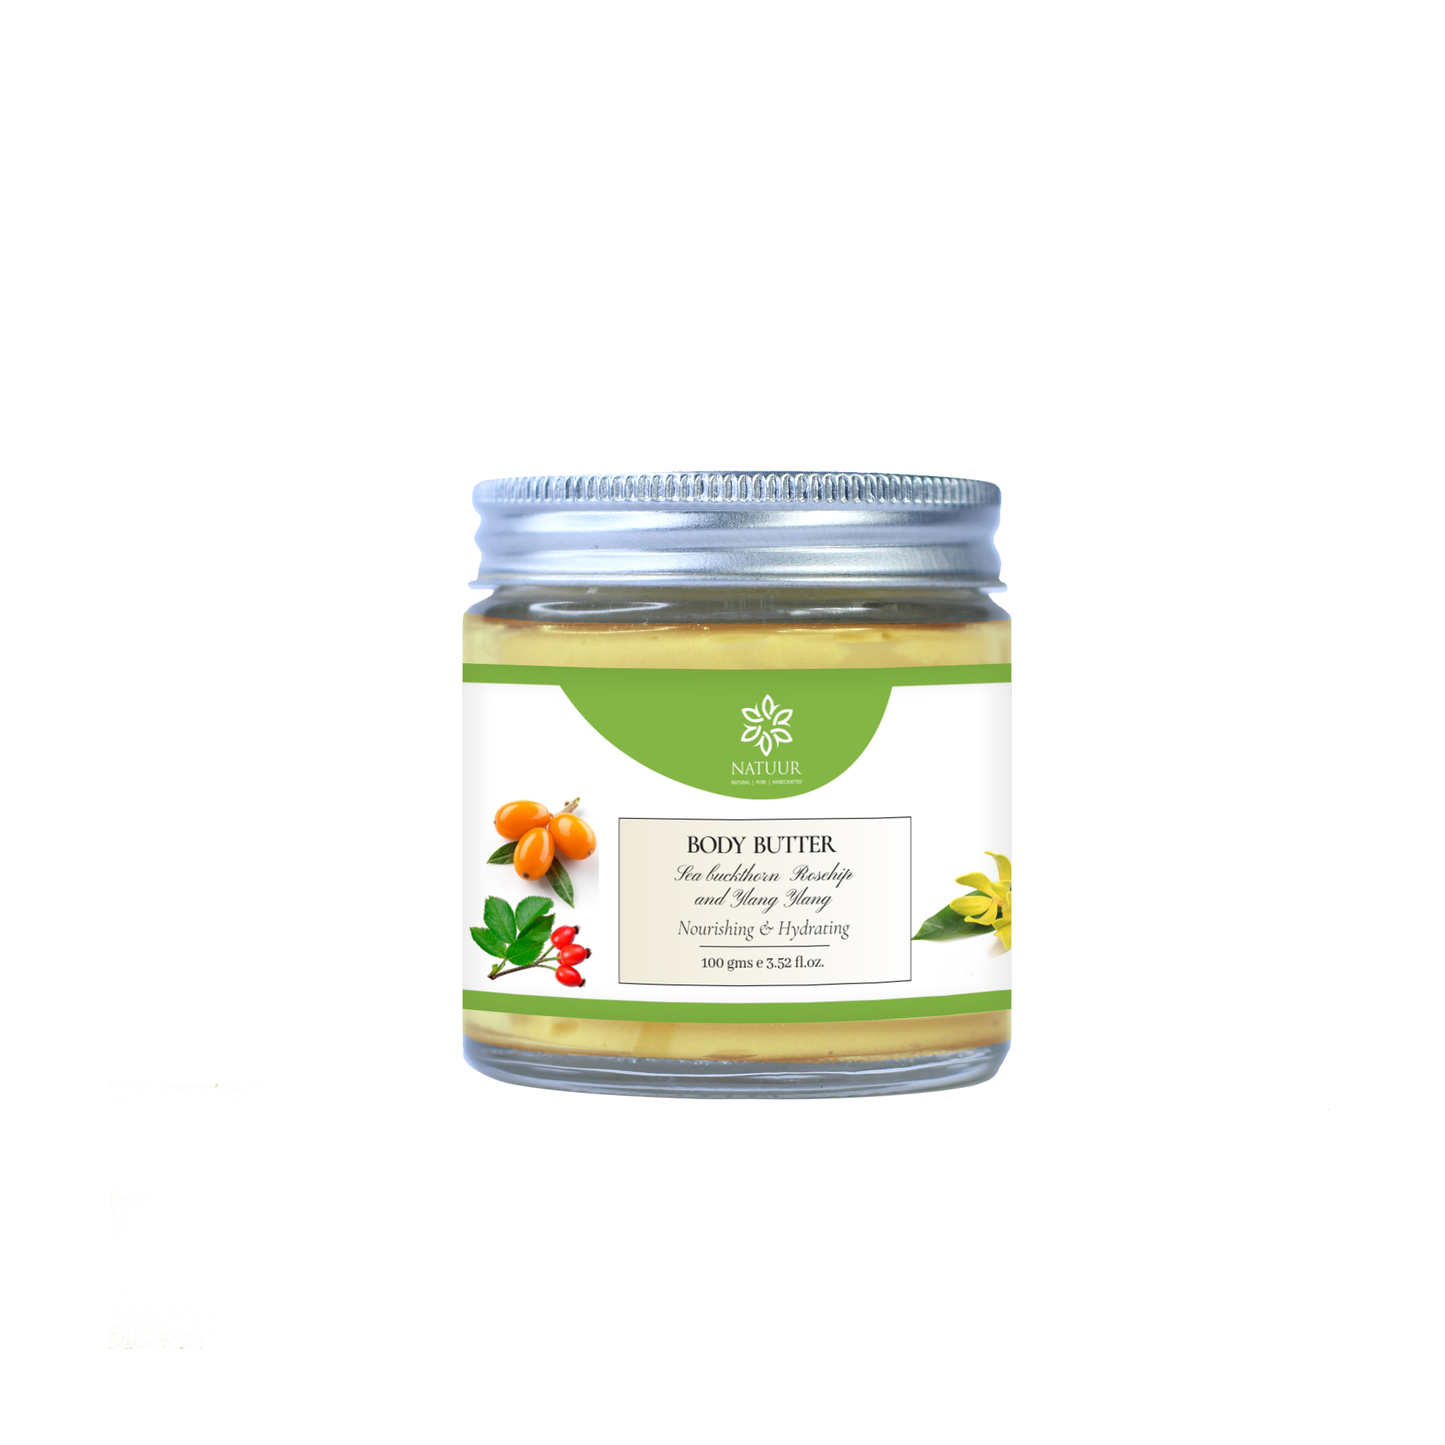 Body Butter Seabuckthorn, Rosehip and Ylang Ylang - Natuur.in